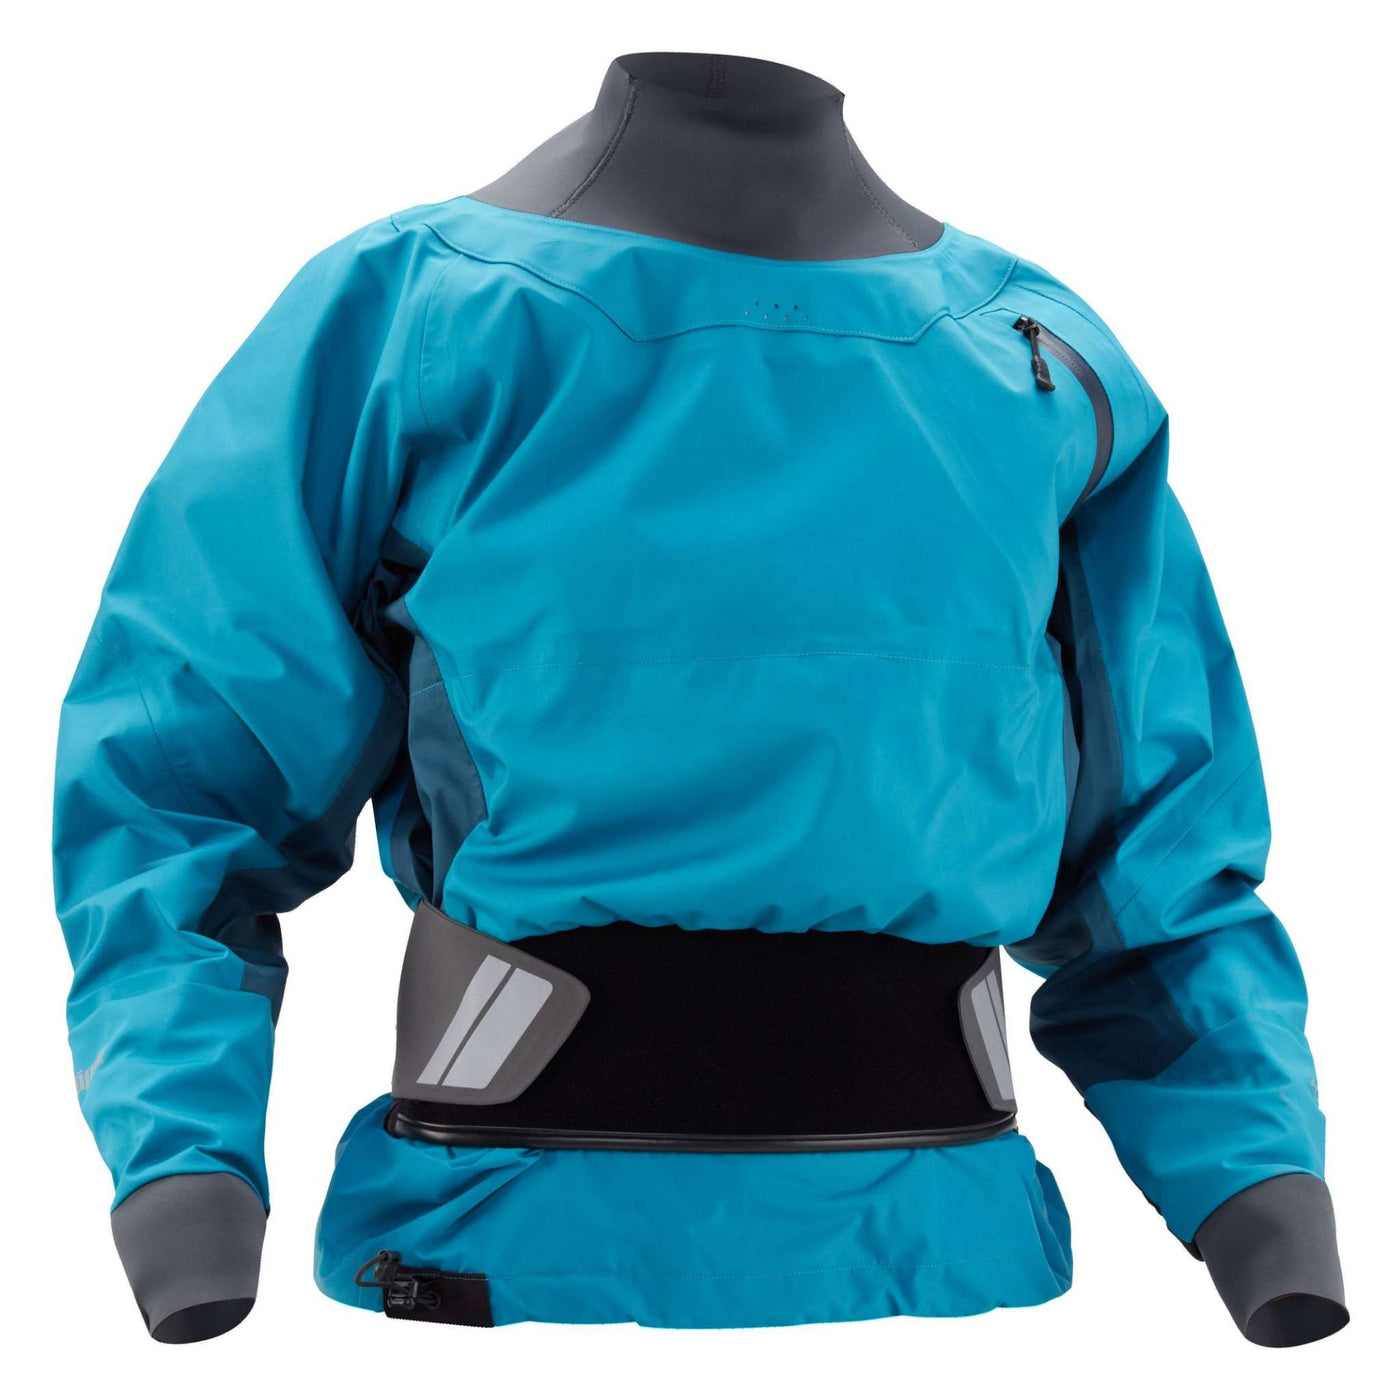 NRS Flux Dry Top - Womens | White Water Kayaking Clothing | Further Faster Christchurch NZ #fjord